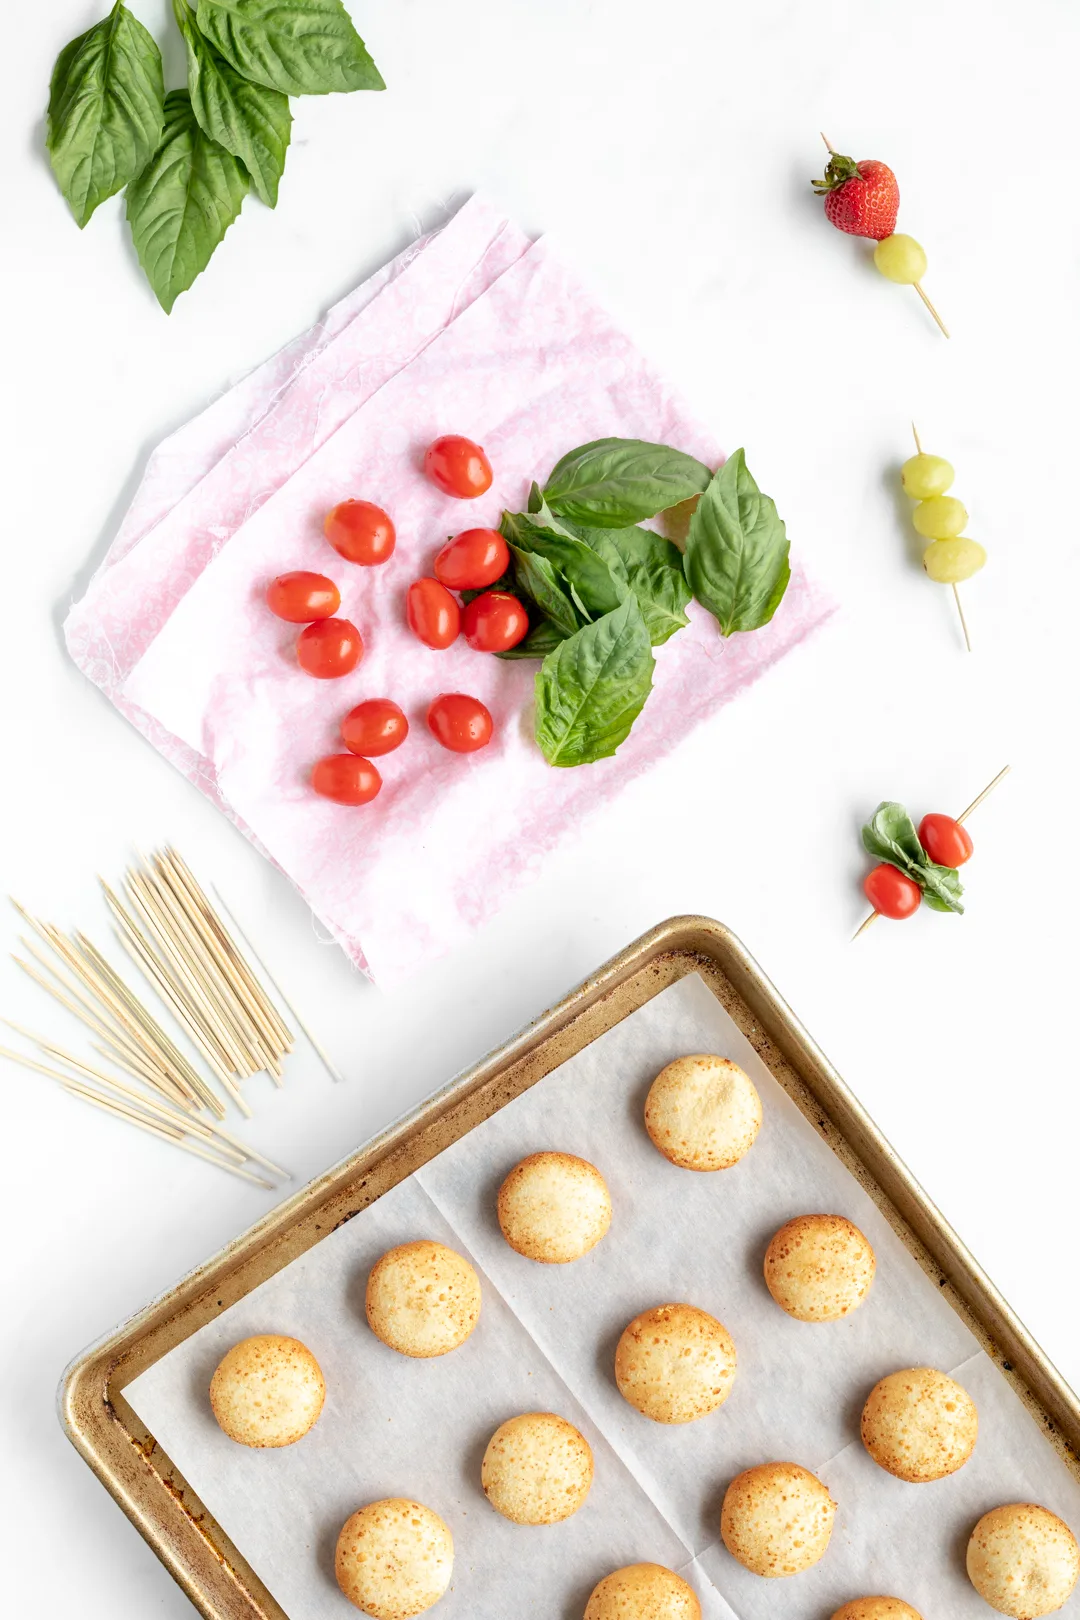 Snack Kebabs for inspired after school snacking.